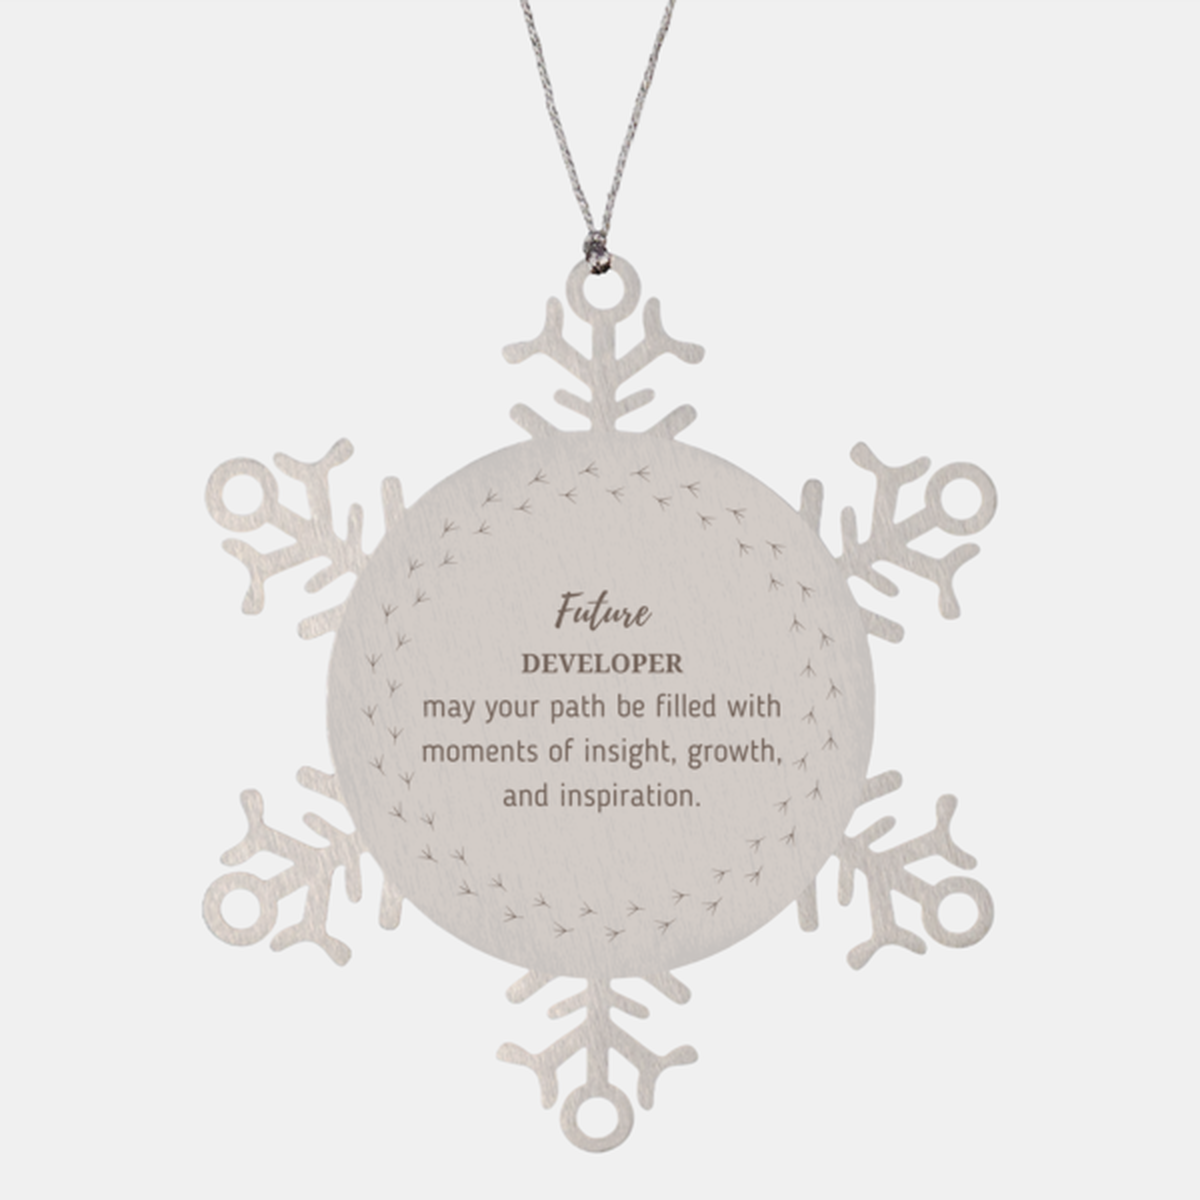 Future Developer Gifts, May your path be filled with moments of insight, Graduation Gifts for New Developer, Christmas Unique Snowflake Ornament For Men, Women, Friends